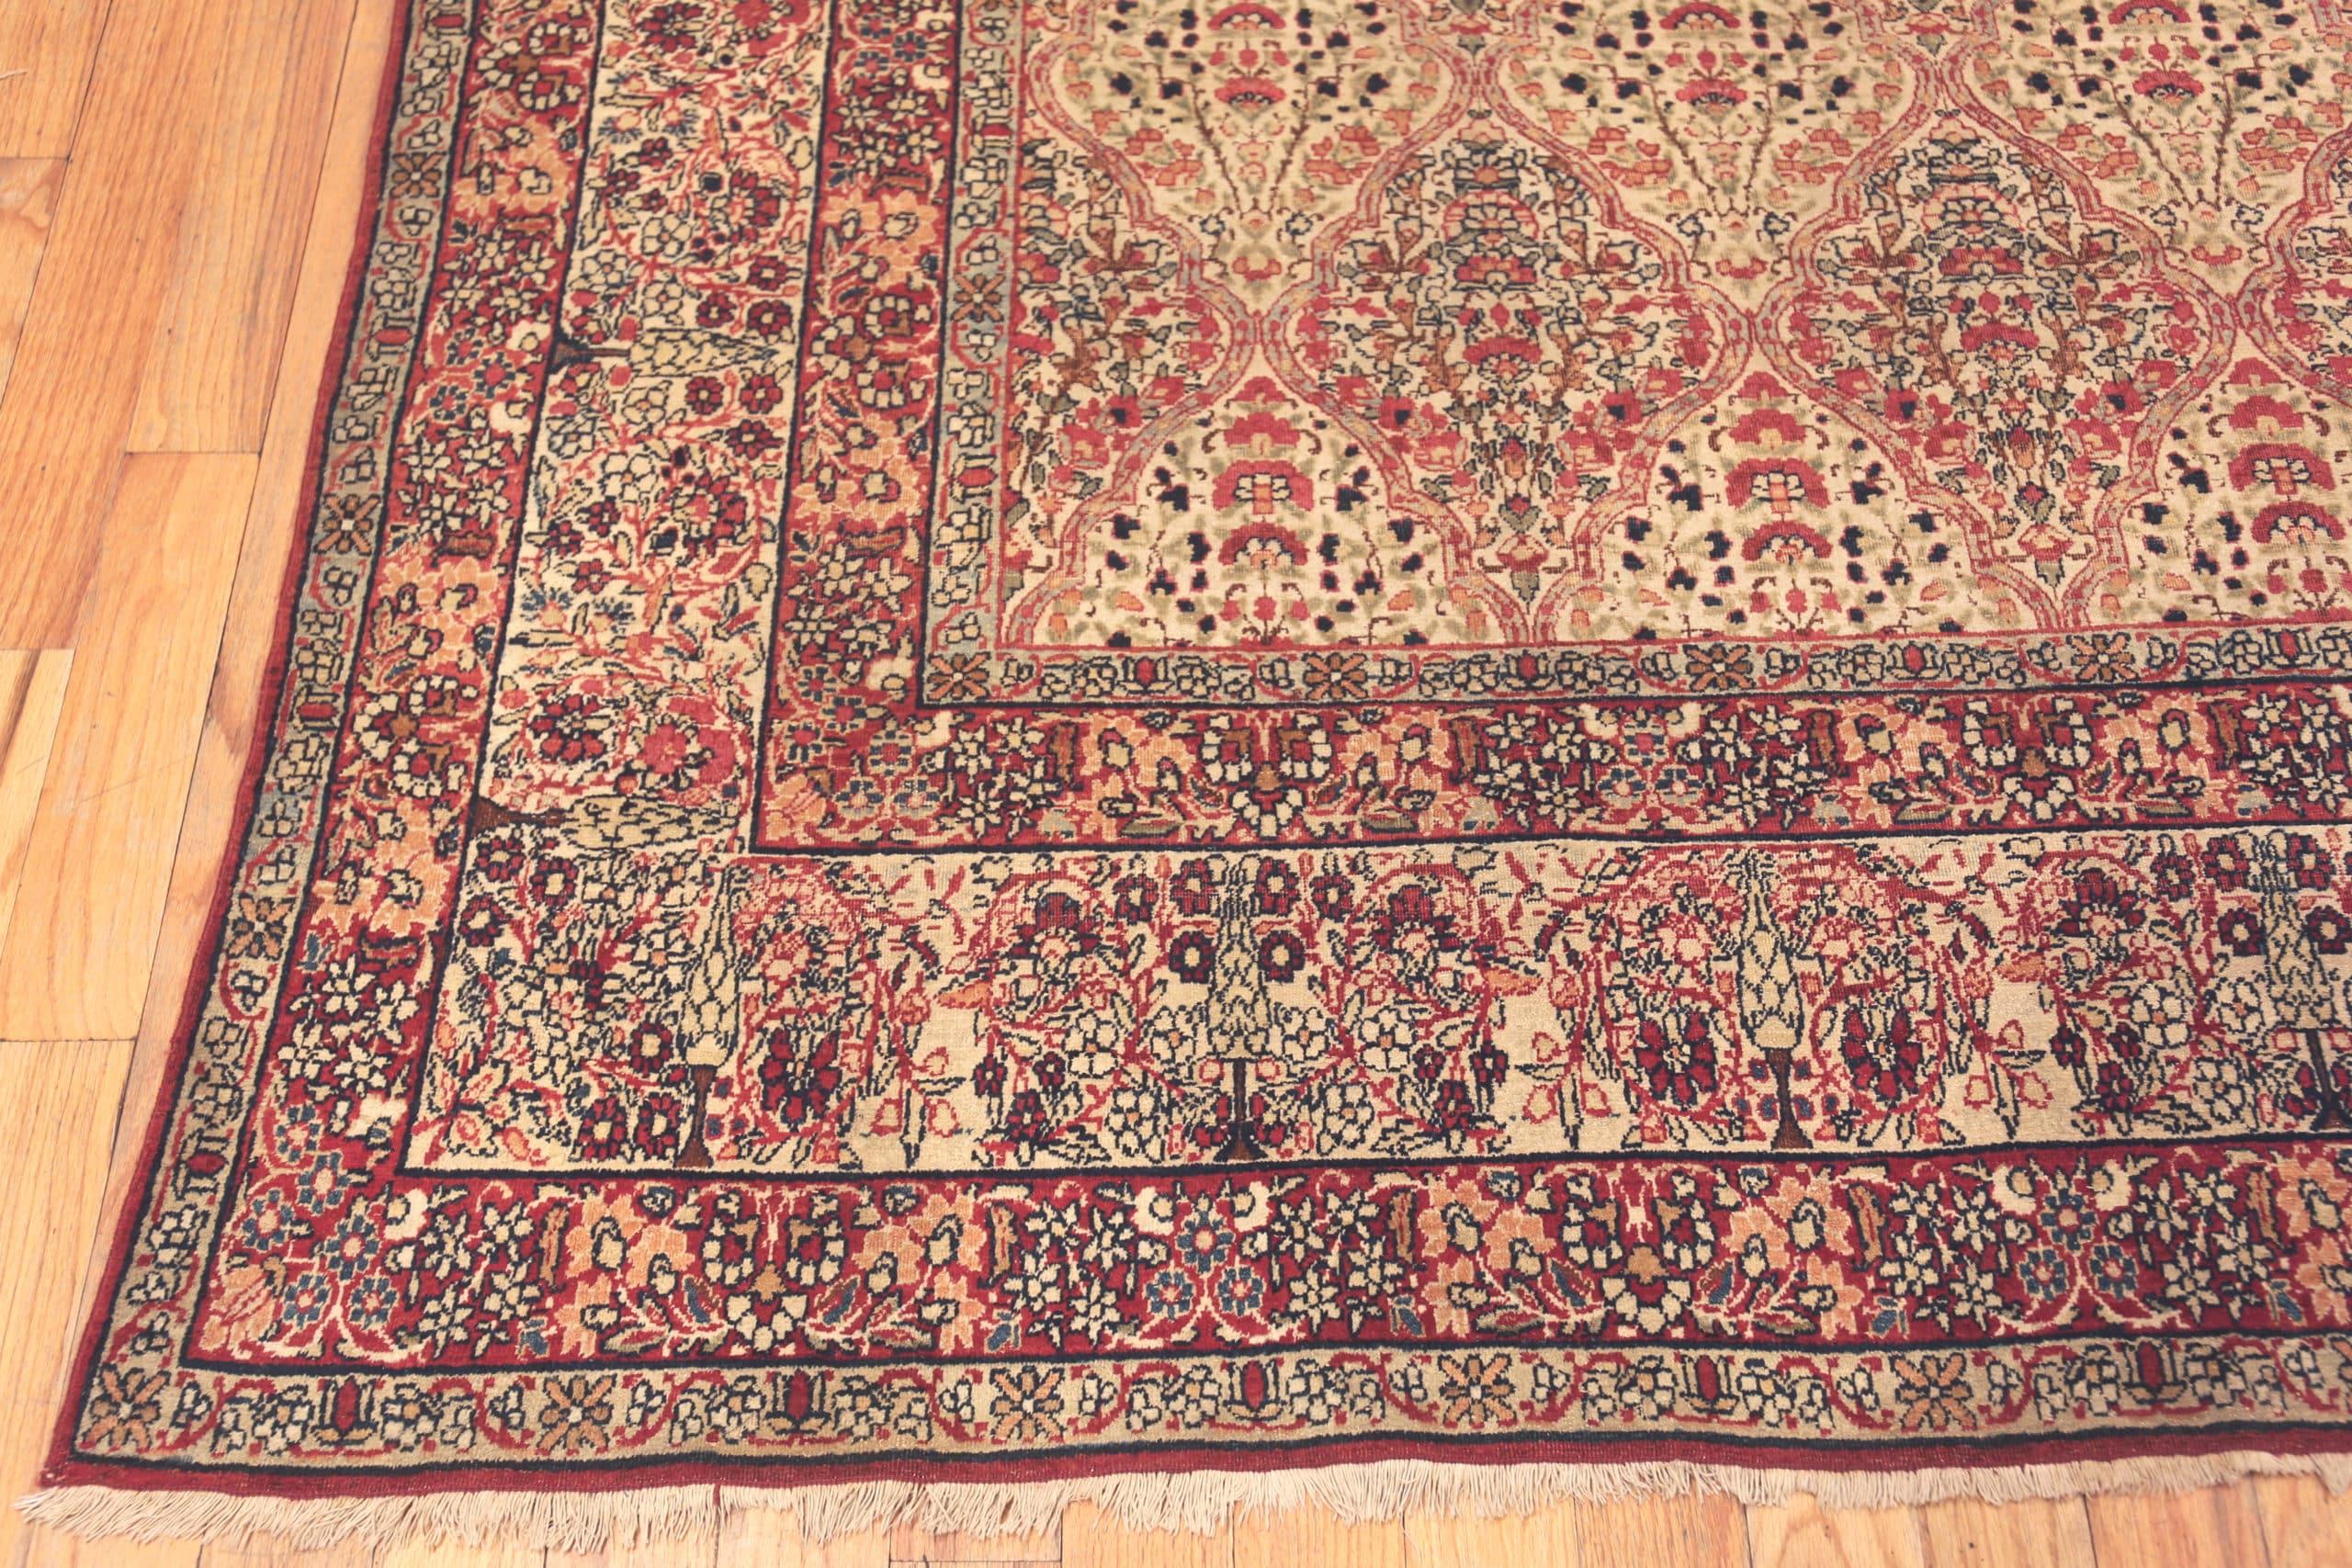 Hand-Knotted Antique Persian Kerman Rug. 8 ft 9 in x 12 ft 3 in